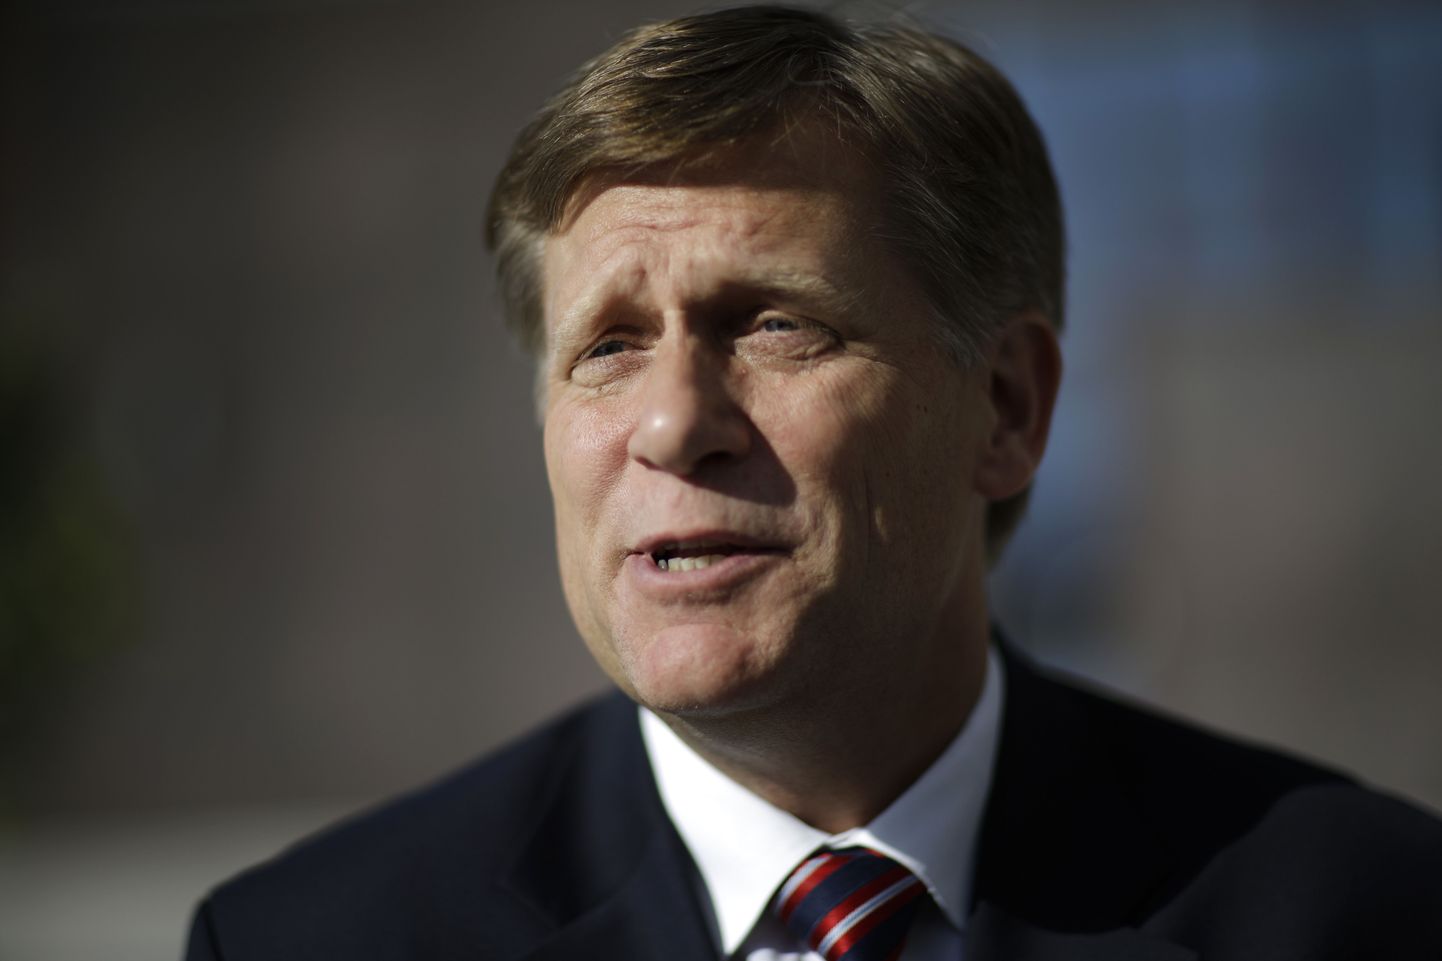 FILE - In this Feb. 7, 2014 file photo, Michael McFaul speaks with a reporter in Sochi, Russia. McFaul, the former U.S. ambassador to Russia said Friday, Nov. 11, 2016, that he has been banned from traveling there in a tit-for-tat response to U.S. visa bans for senior Russian officials. (AP Photo/David Goldman, File)